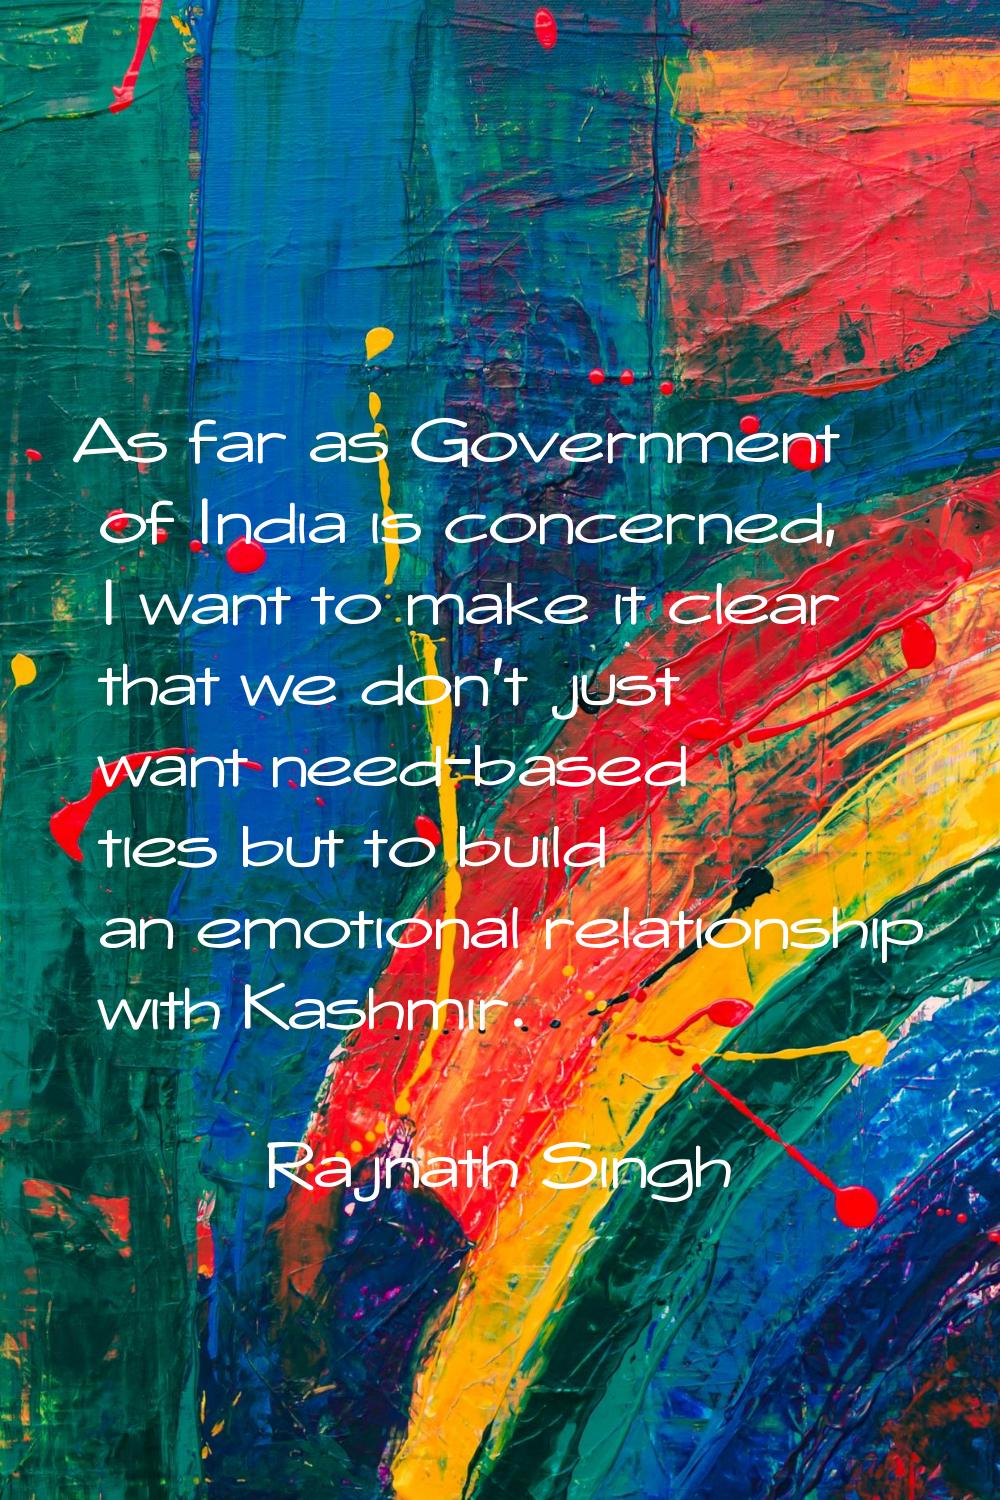 As far as Government of India is concerned, I want to make it clear that we don't just want need-ba